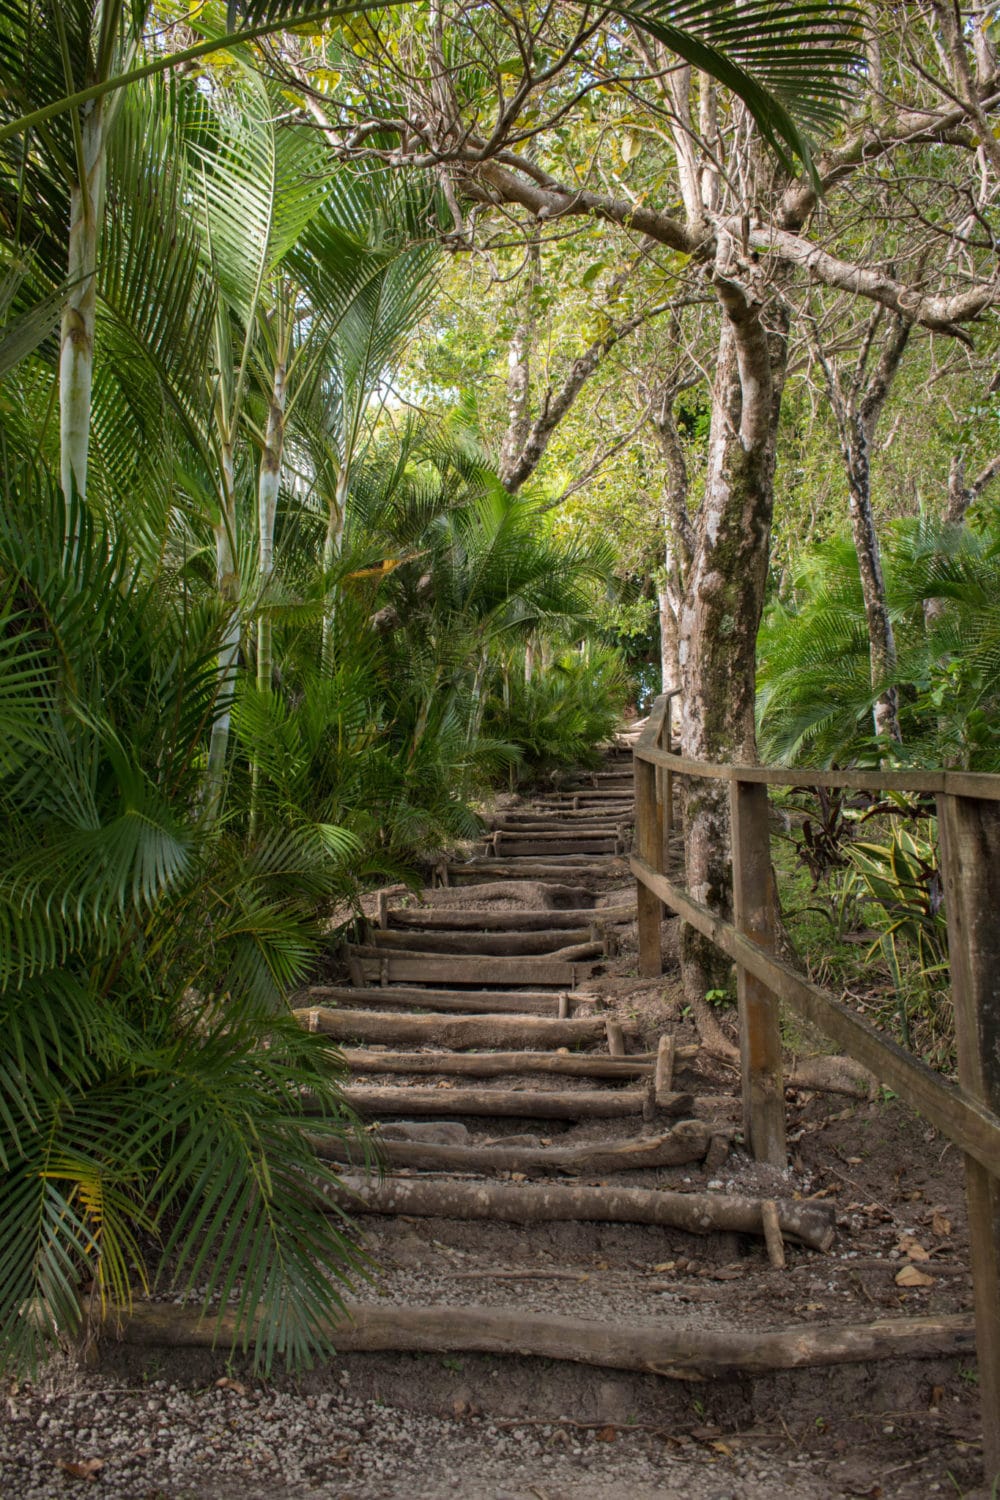 "Stairway to Heaven" on Tet Paul Nature Trail in St. Lucia